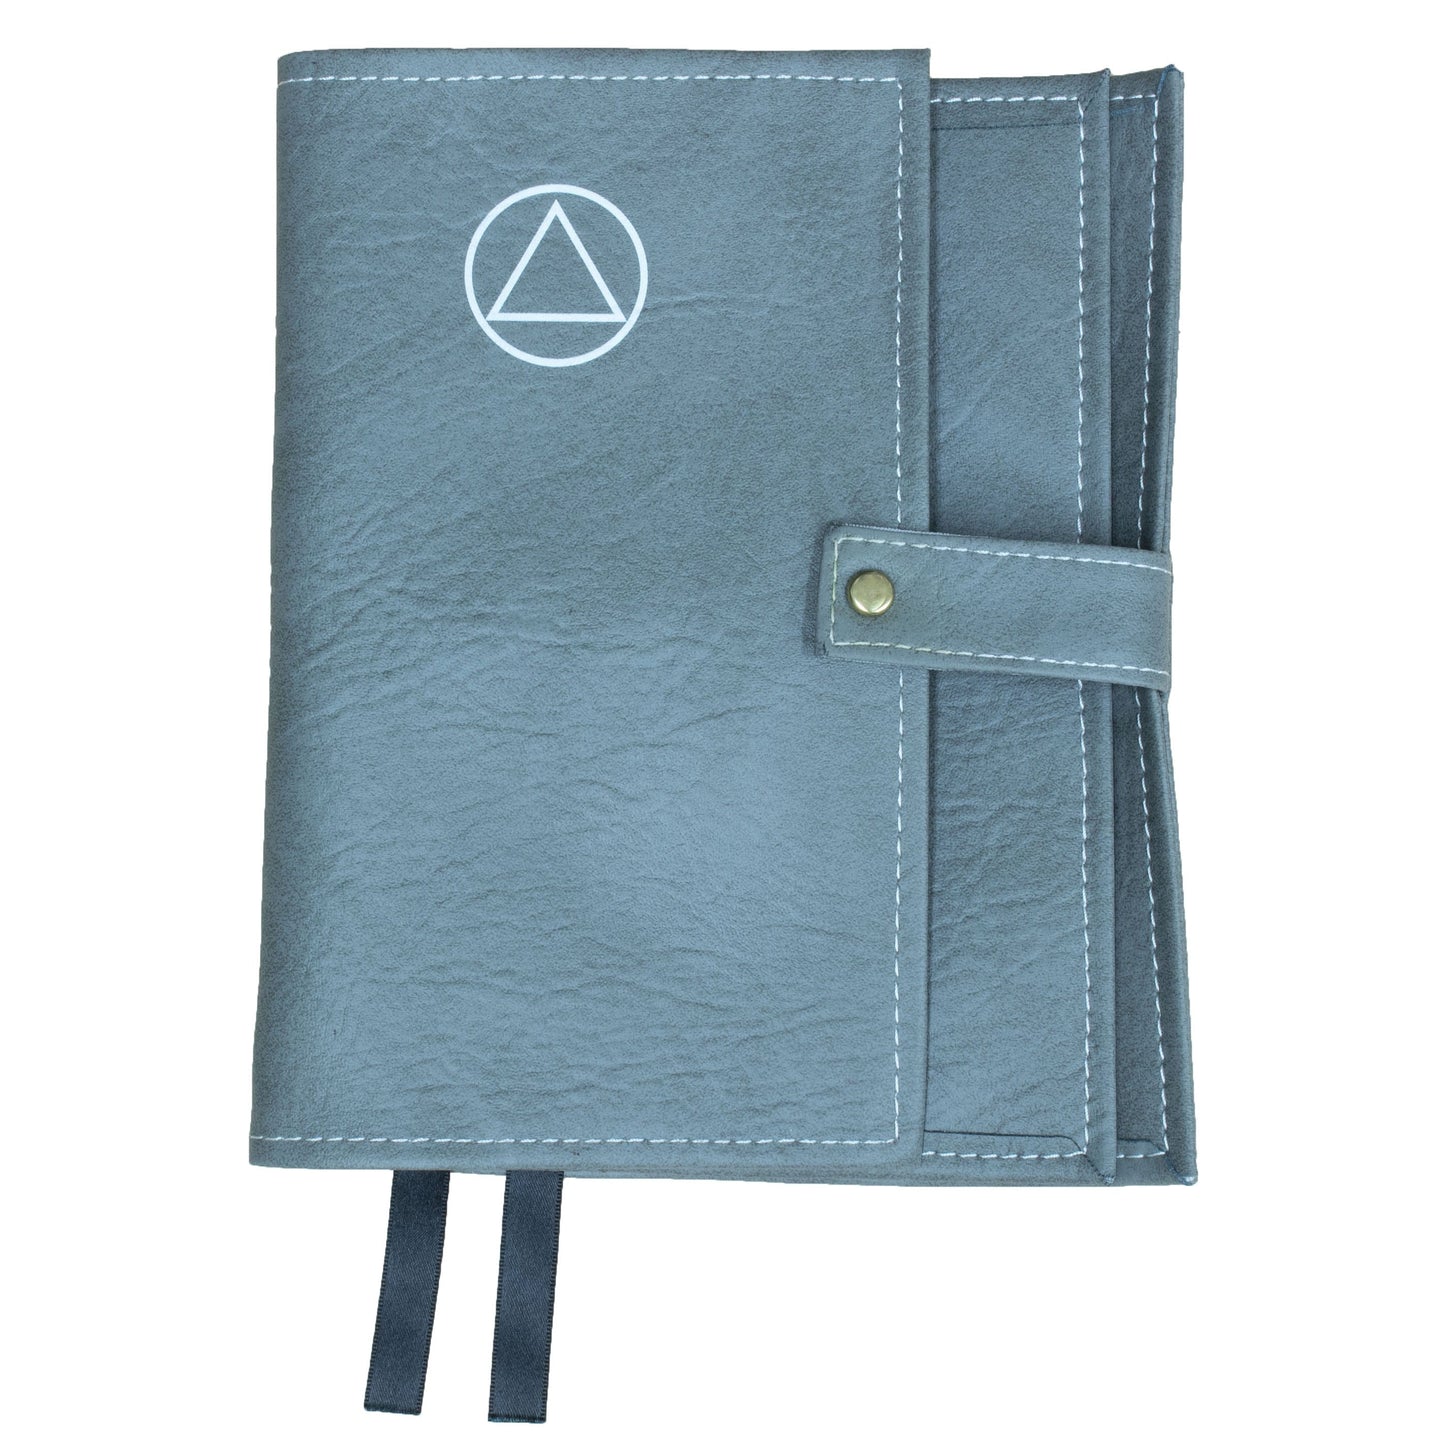 AA Gray Double Book Cover With AA Symbol For Hardcover Books